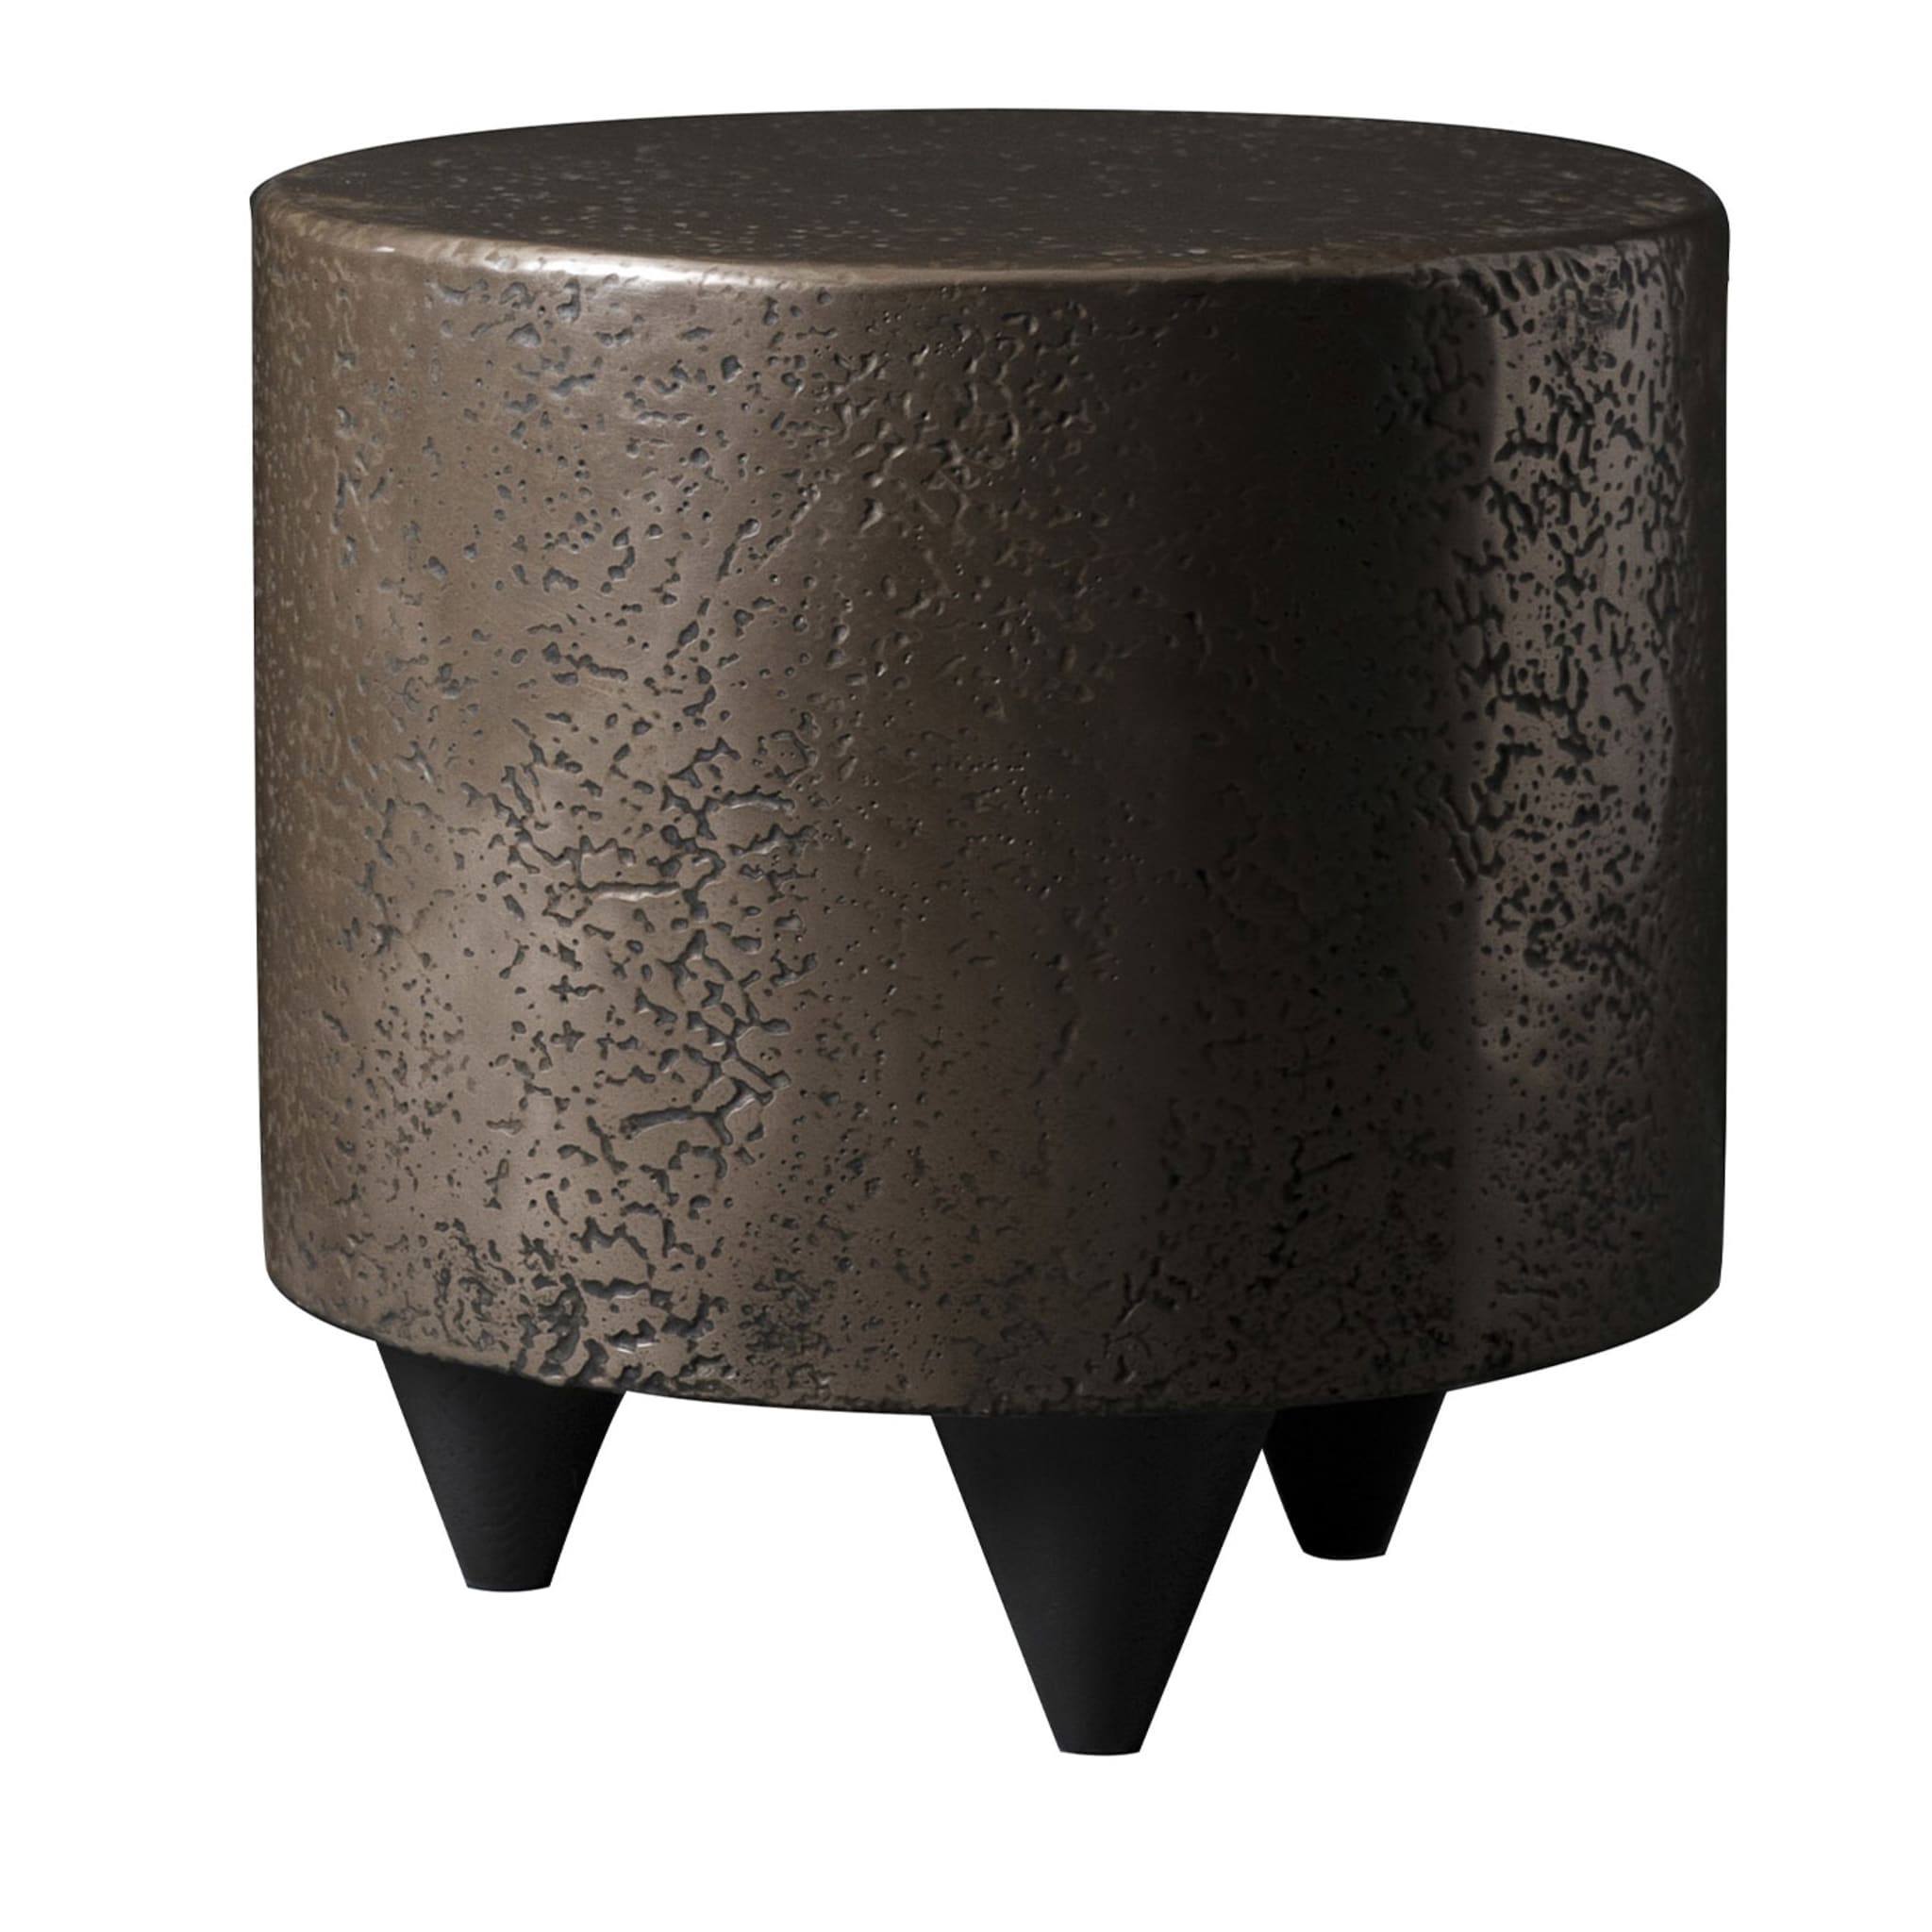 Low Bronze Pouf and Side Table #1 - Main view